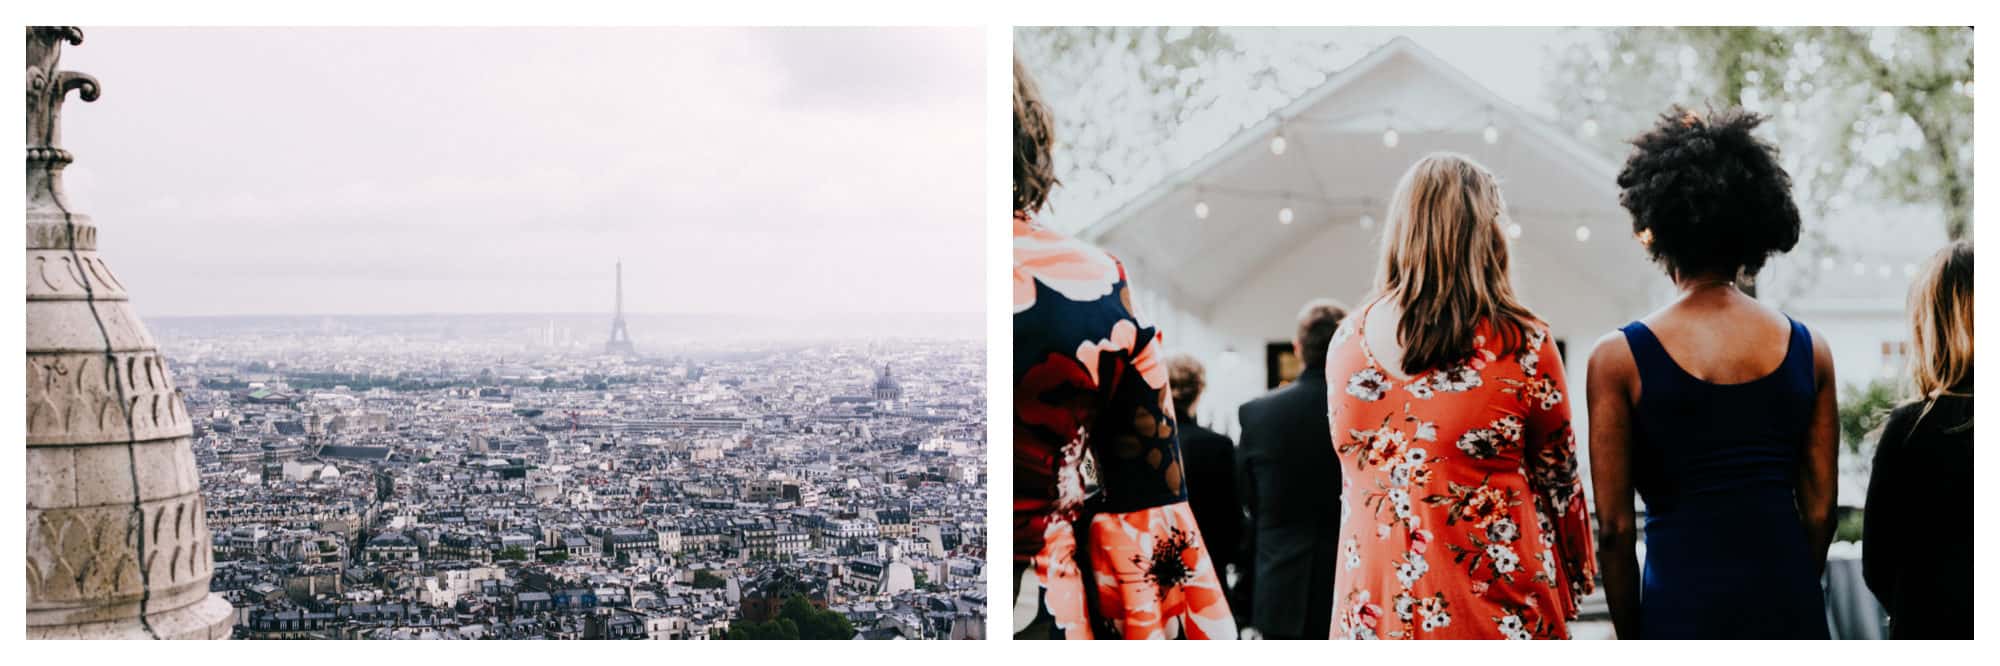 The view of Paris from the Sacré Coeur, with the Eiffel Tower in the background (left). A couple at a concert (right).